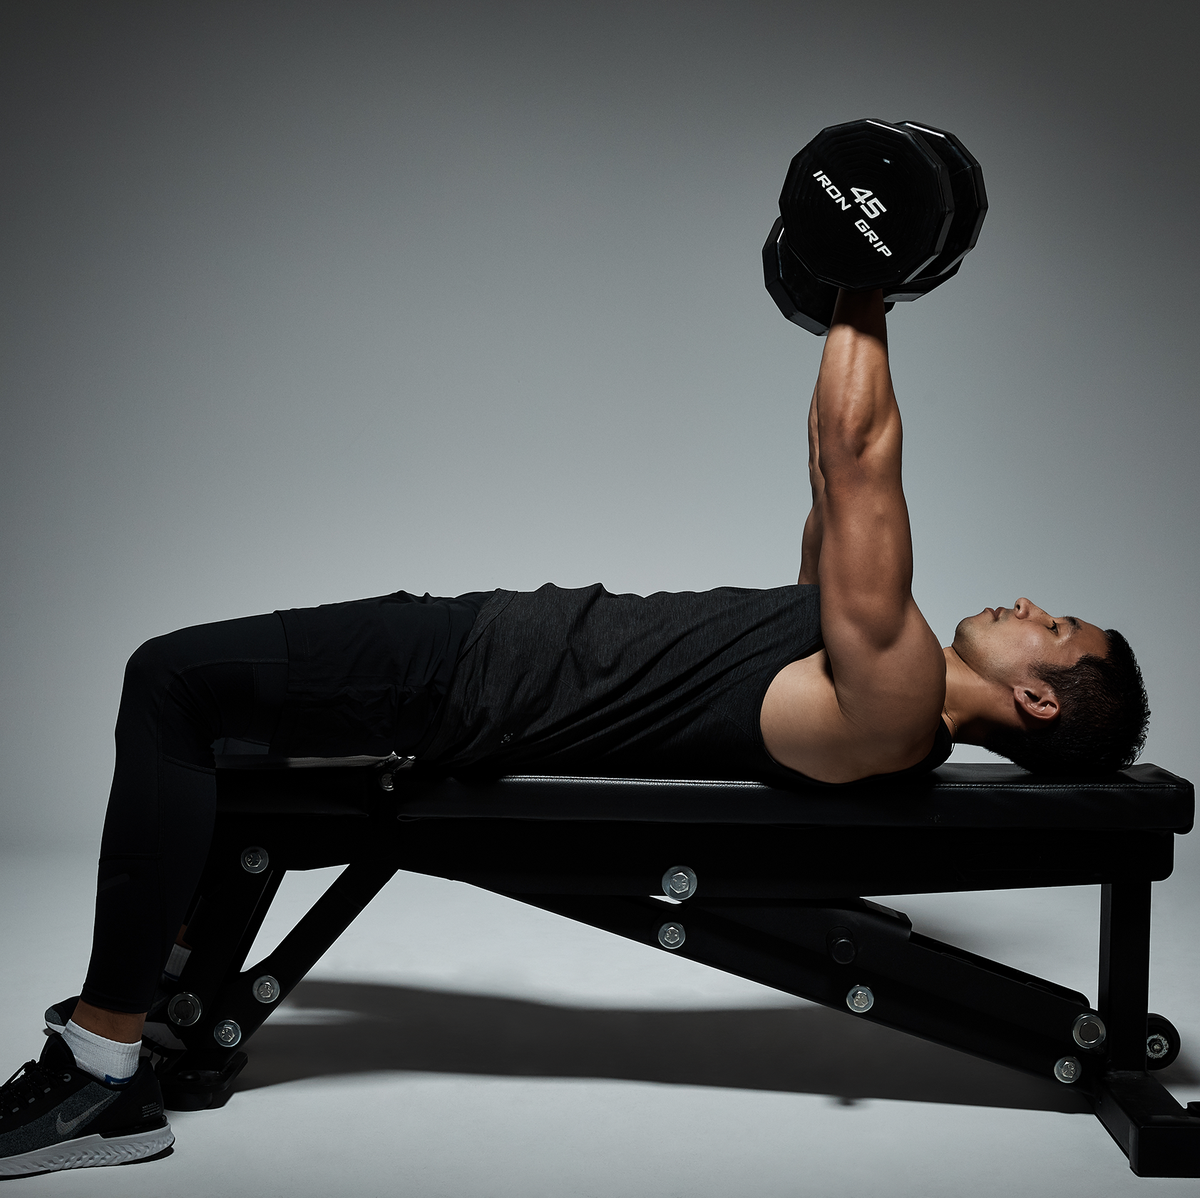 How To Bench Press With Perfect Form - Dumbbell And Barbell Bench